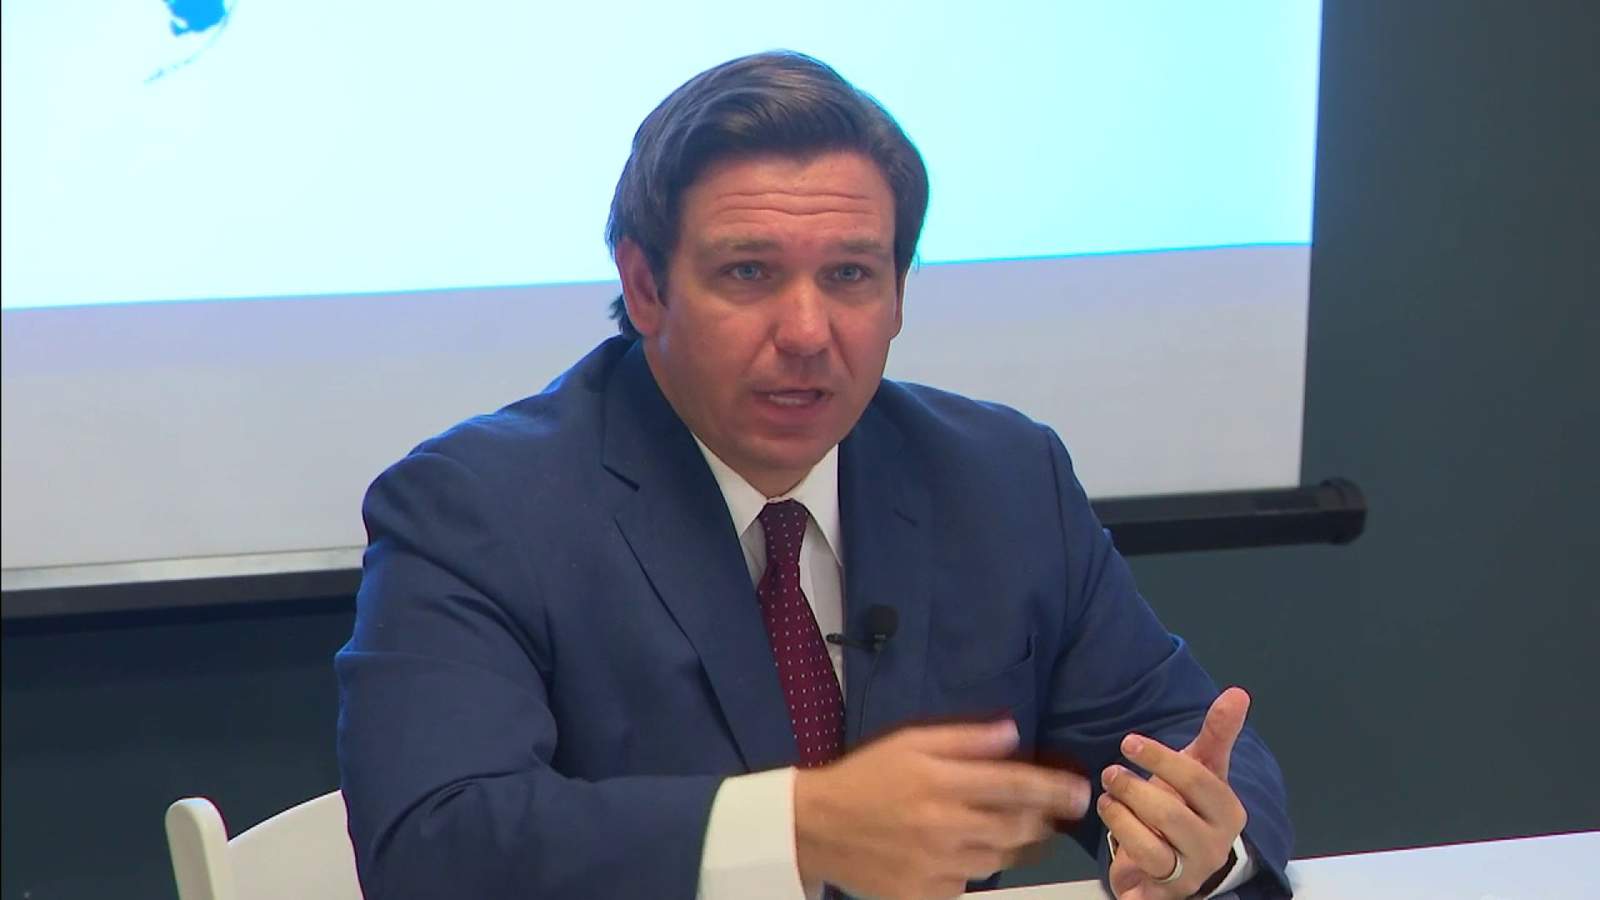 DeSantis to sign new deal to increase coronavirus contact tracing in Florida